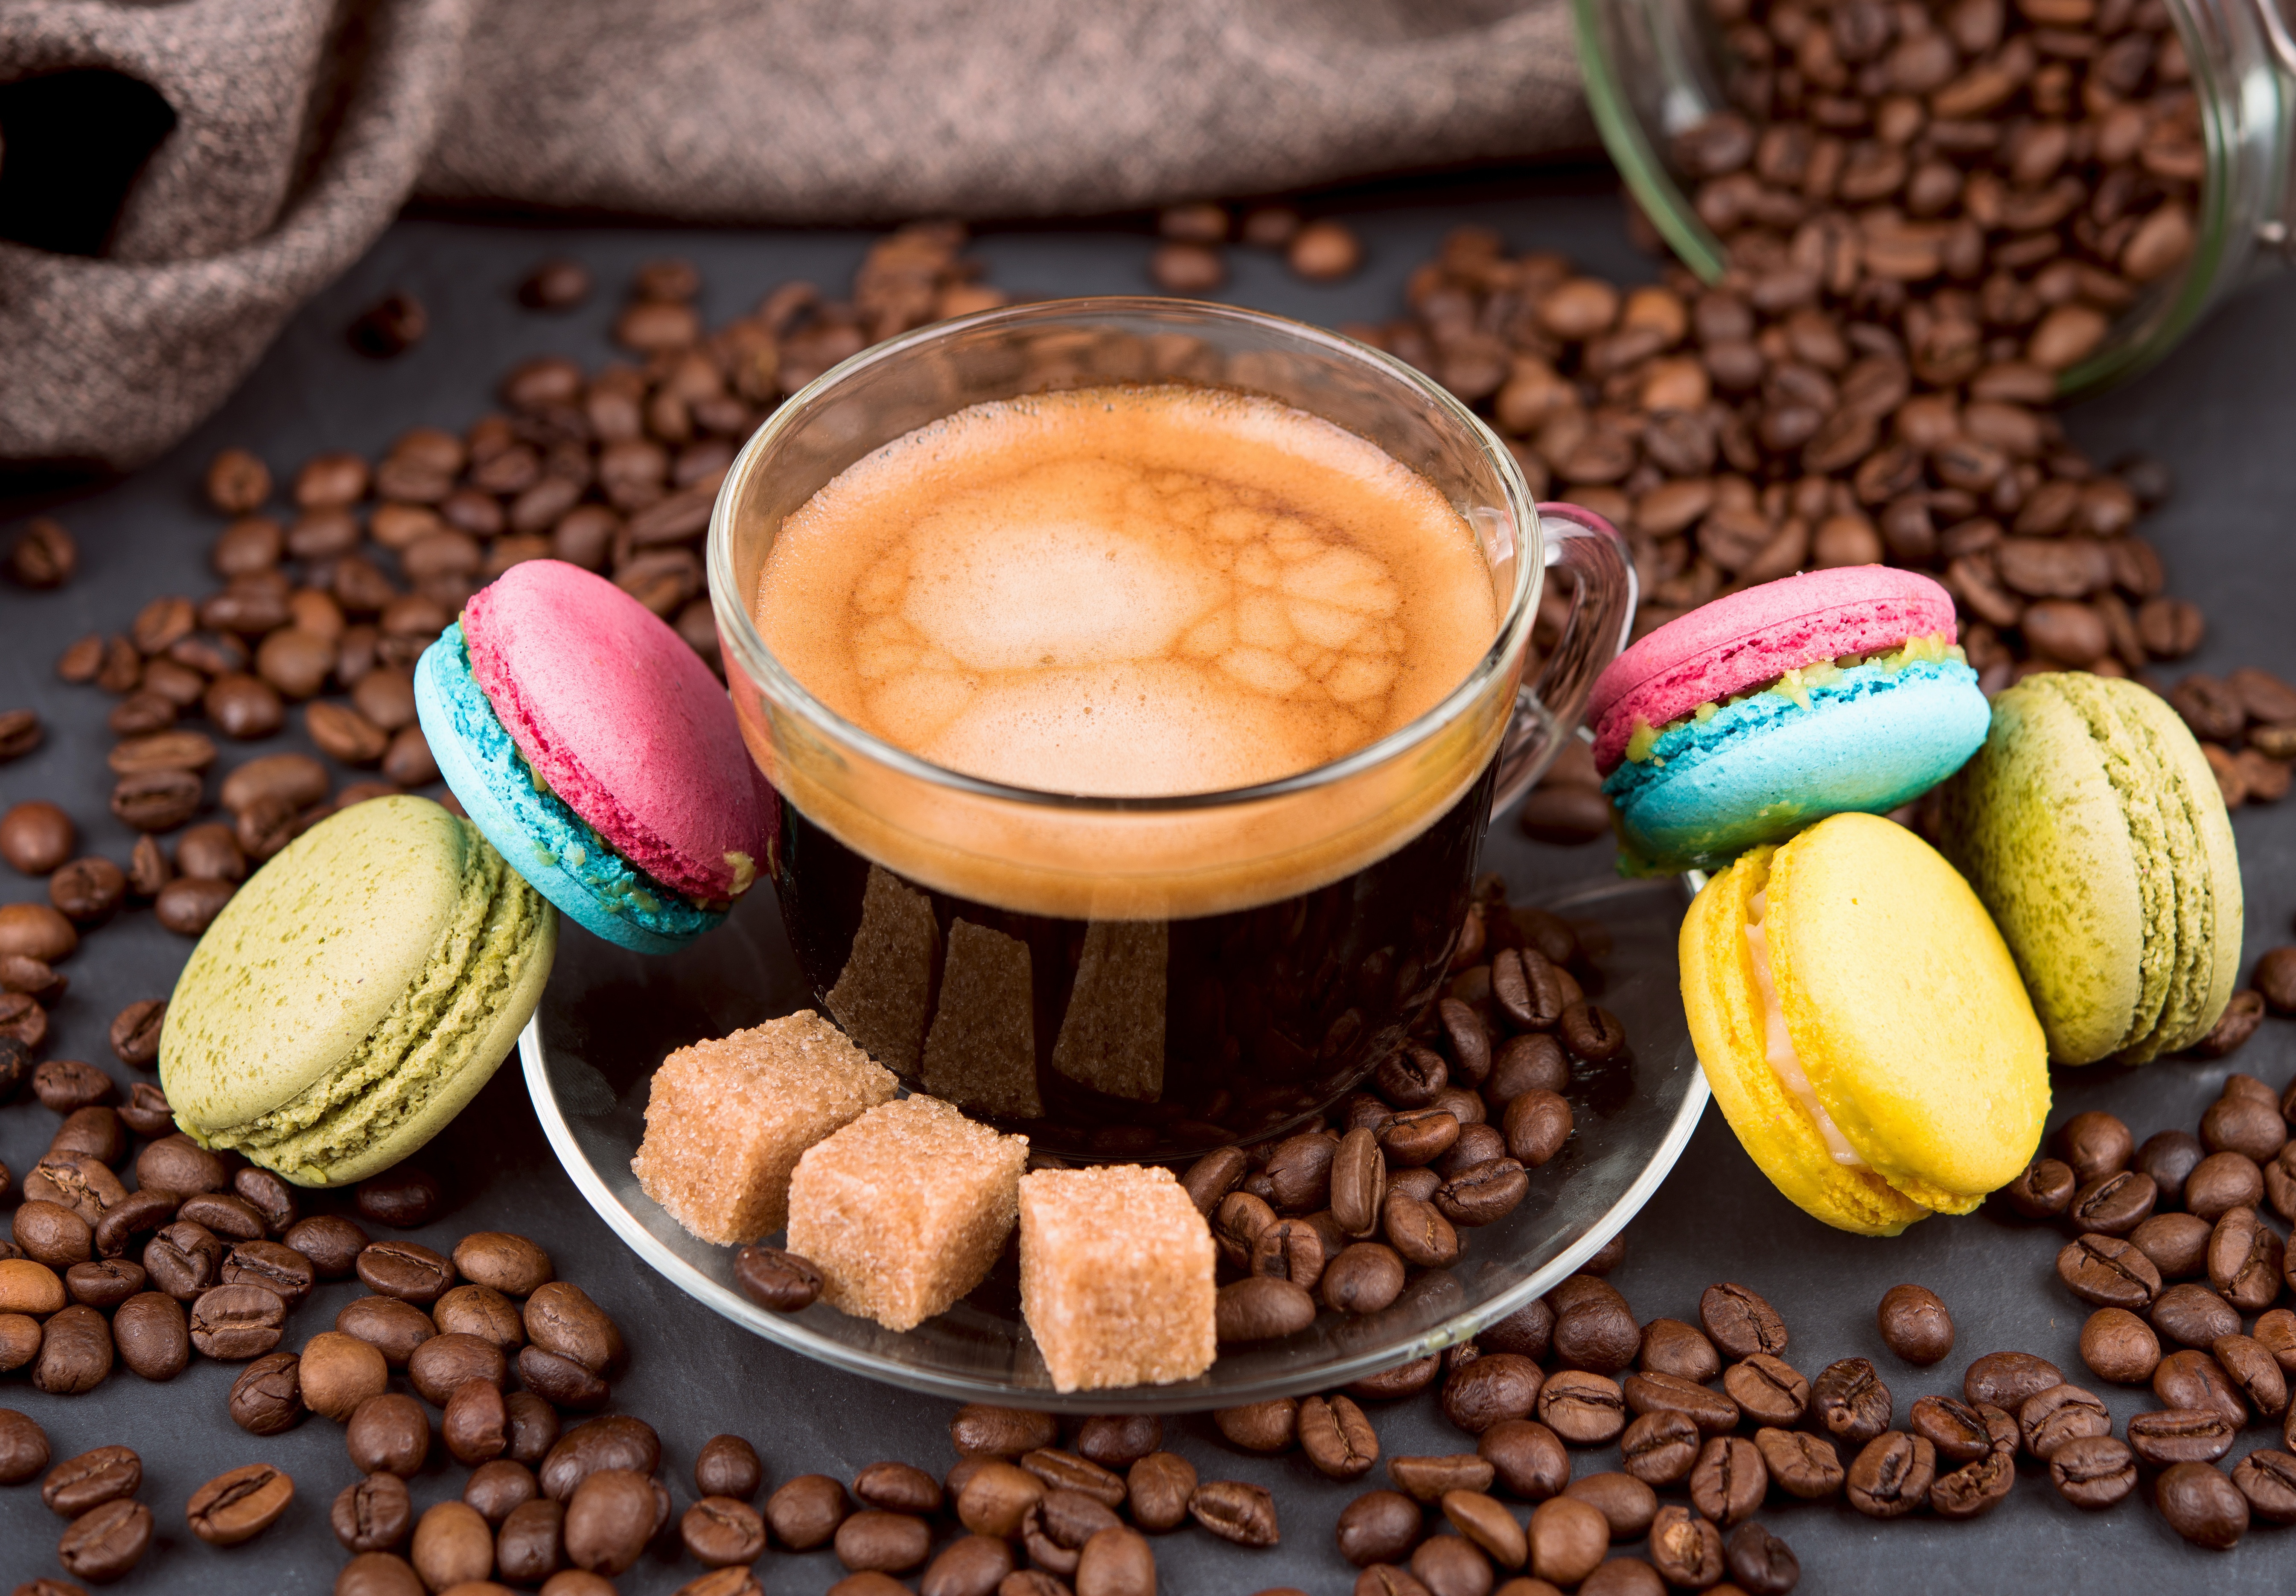 food, coffee, coffee beans, cup, macaron, still life, sugar, sweets cellphone